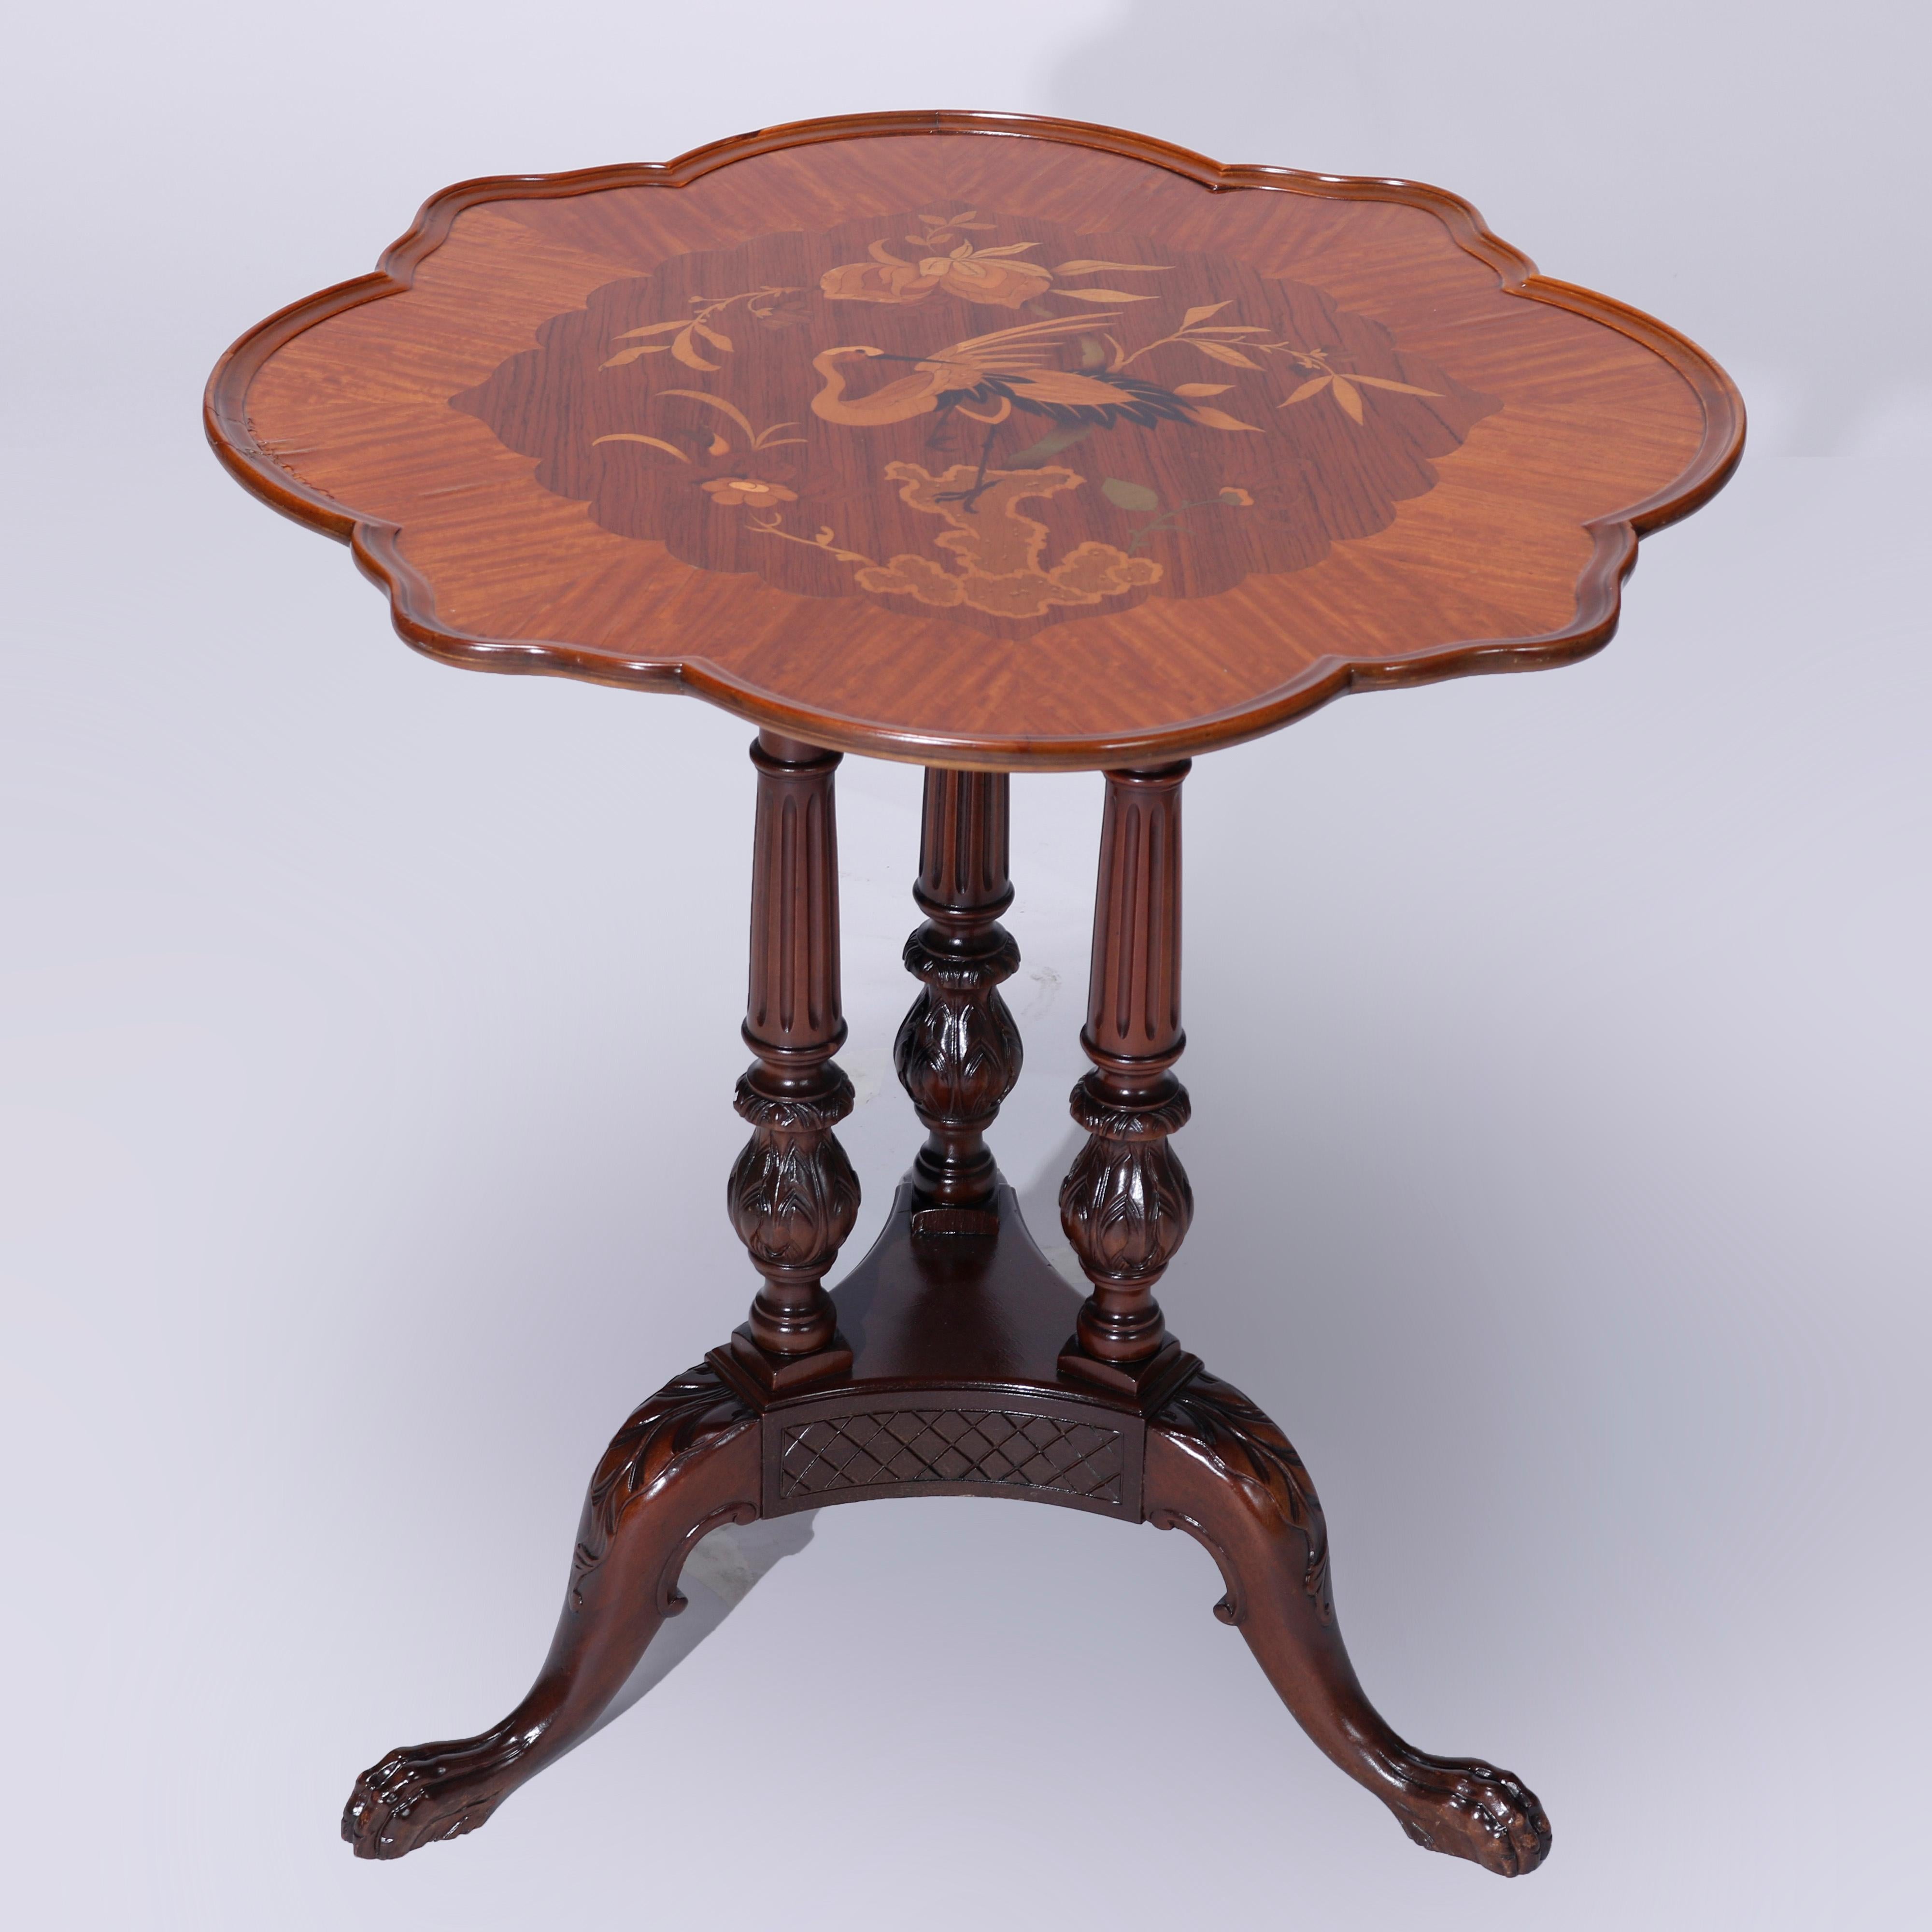 Carved Antique Heron Satinwood Marquetry Scalloped Triple Pedestal Side Tables, c1930 For Sale